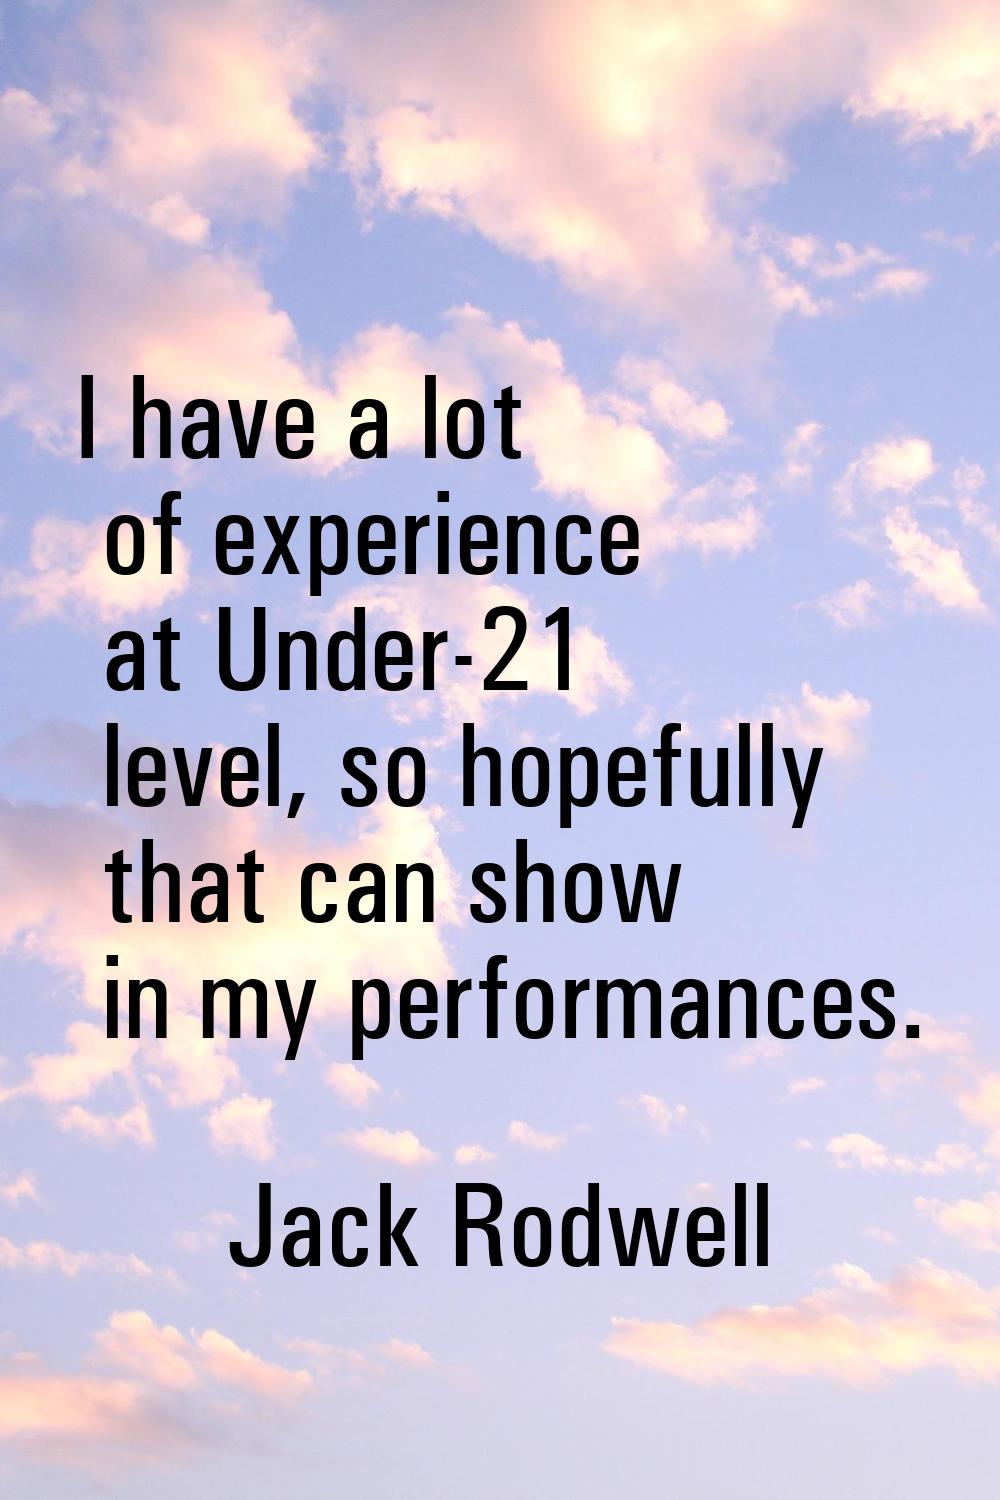 I have a lot of experience at Under-21 level, so hopefully that can show in my performances.